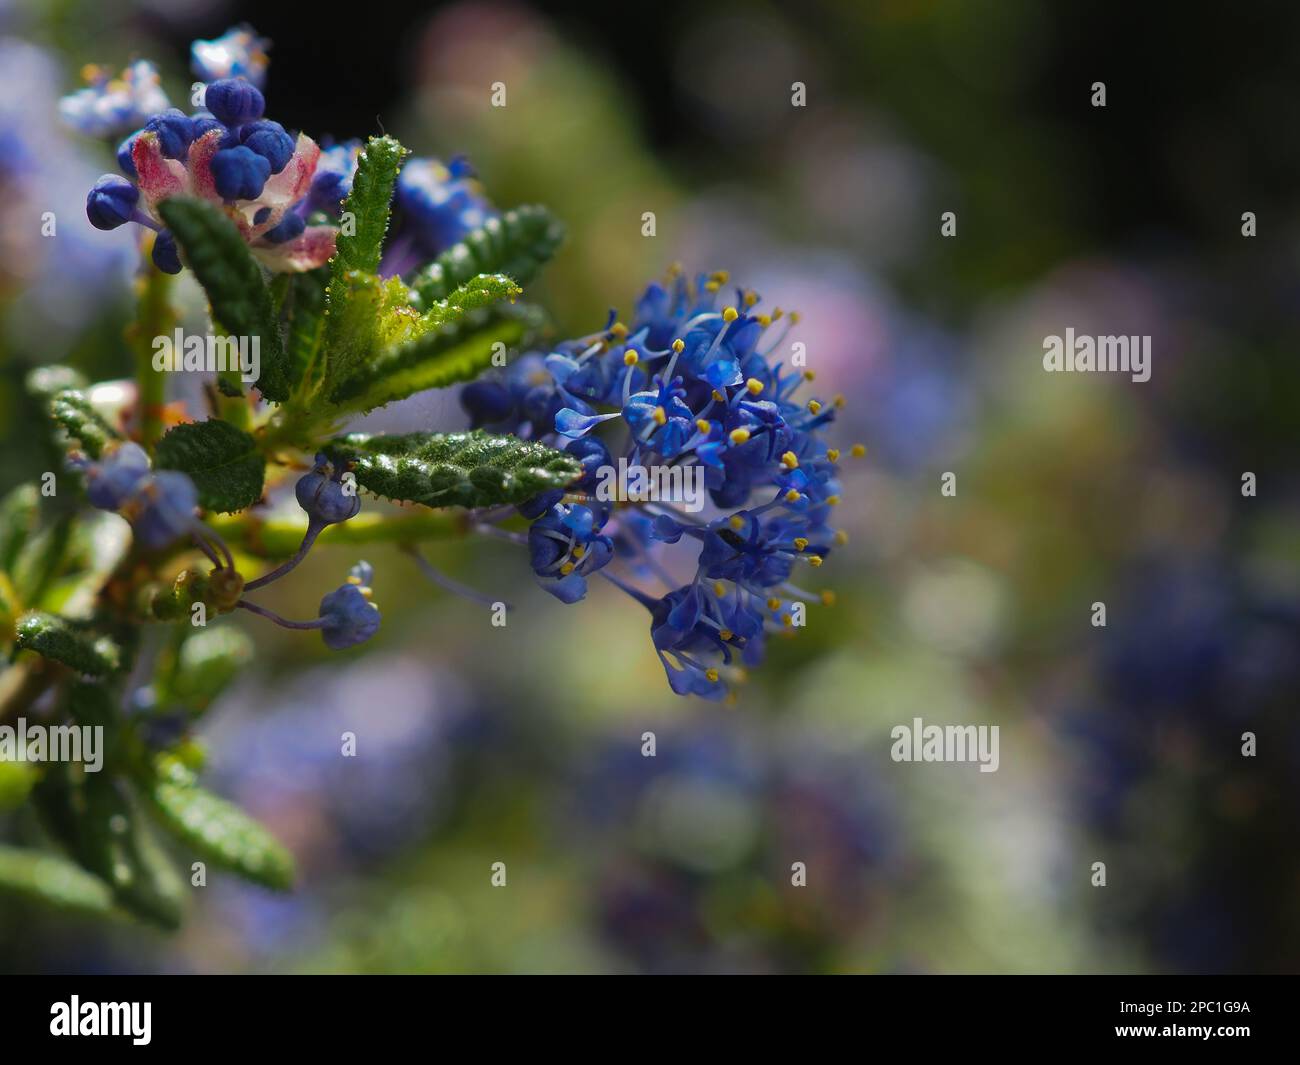 Close up in profile of the indigo flowers of Ceanothus 'Puget Blue' (Californian lilac) with a blurred background Stock Photo